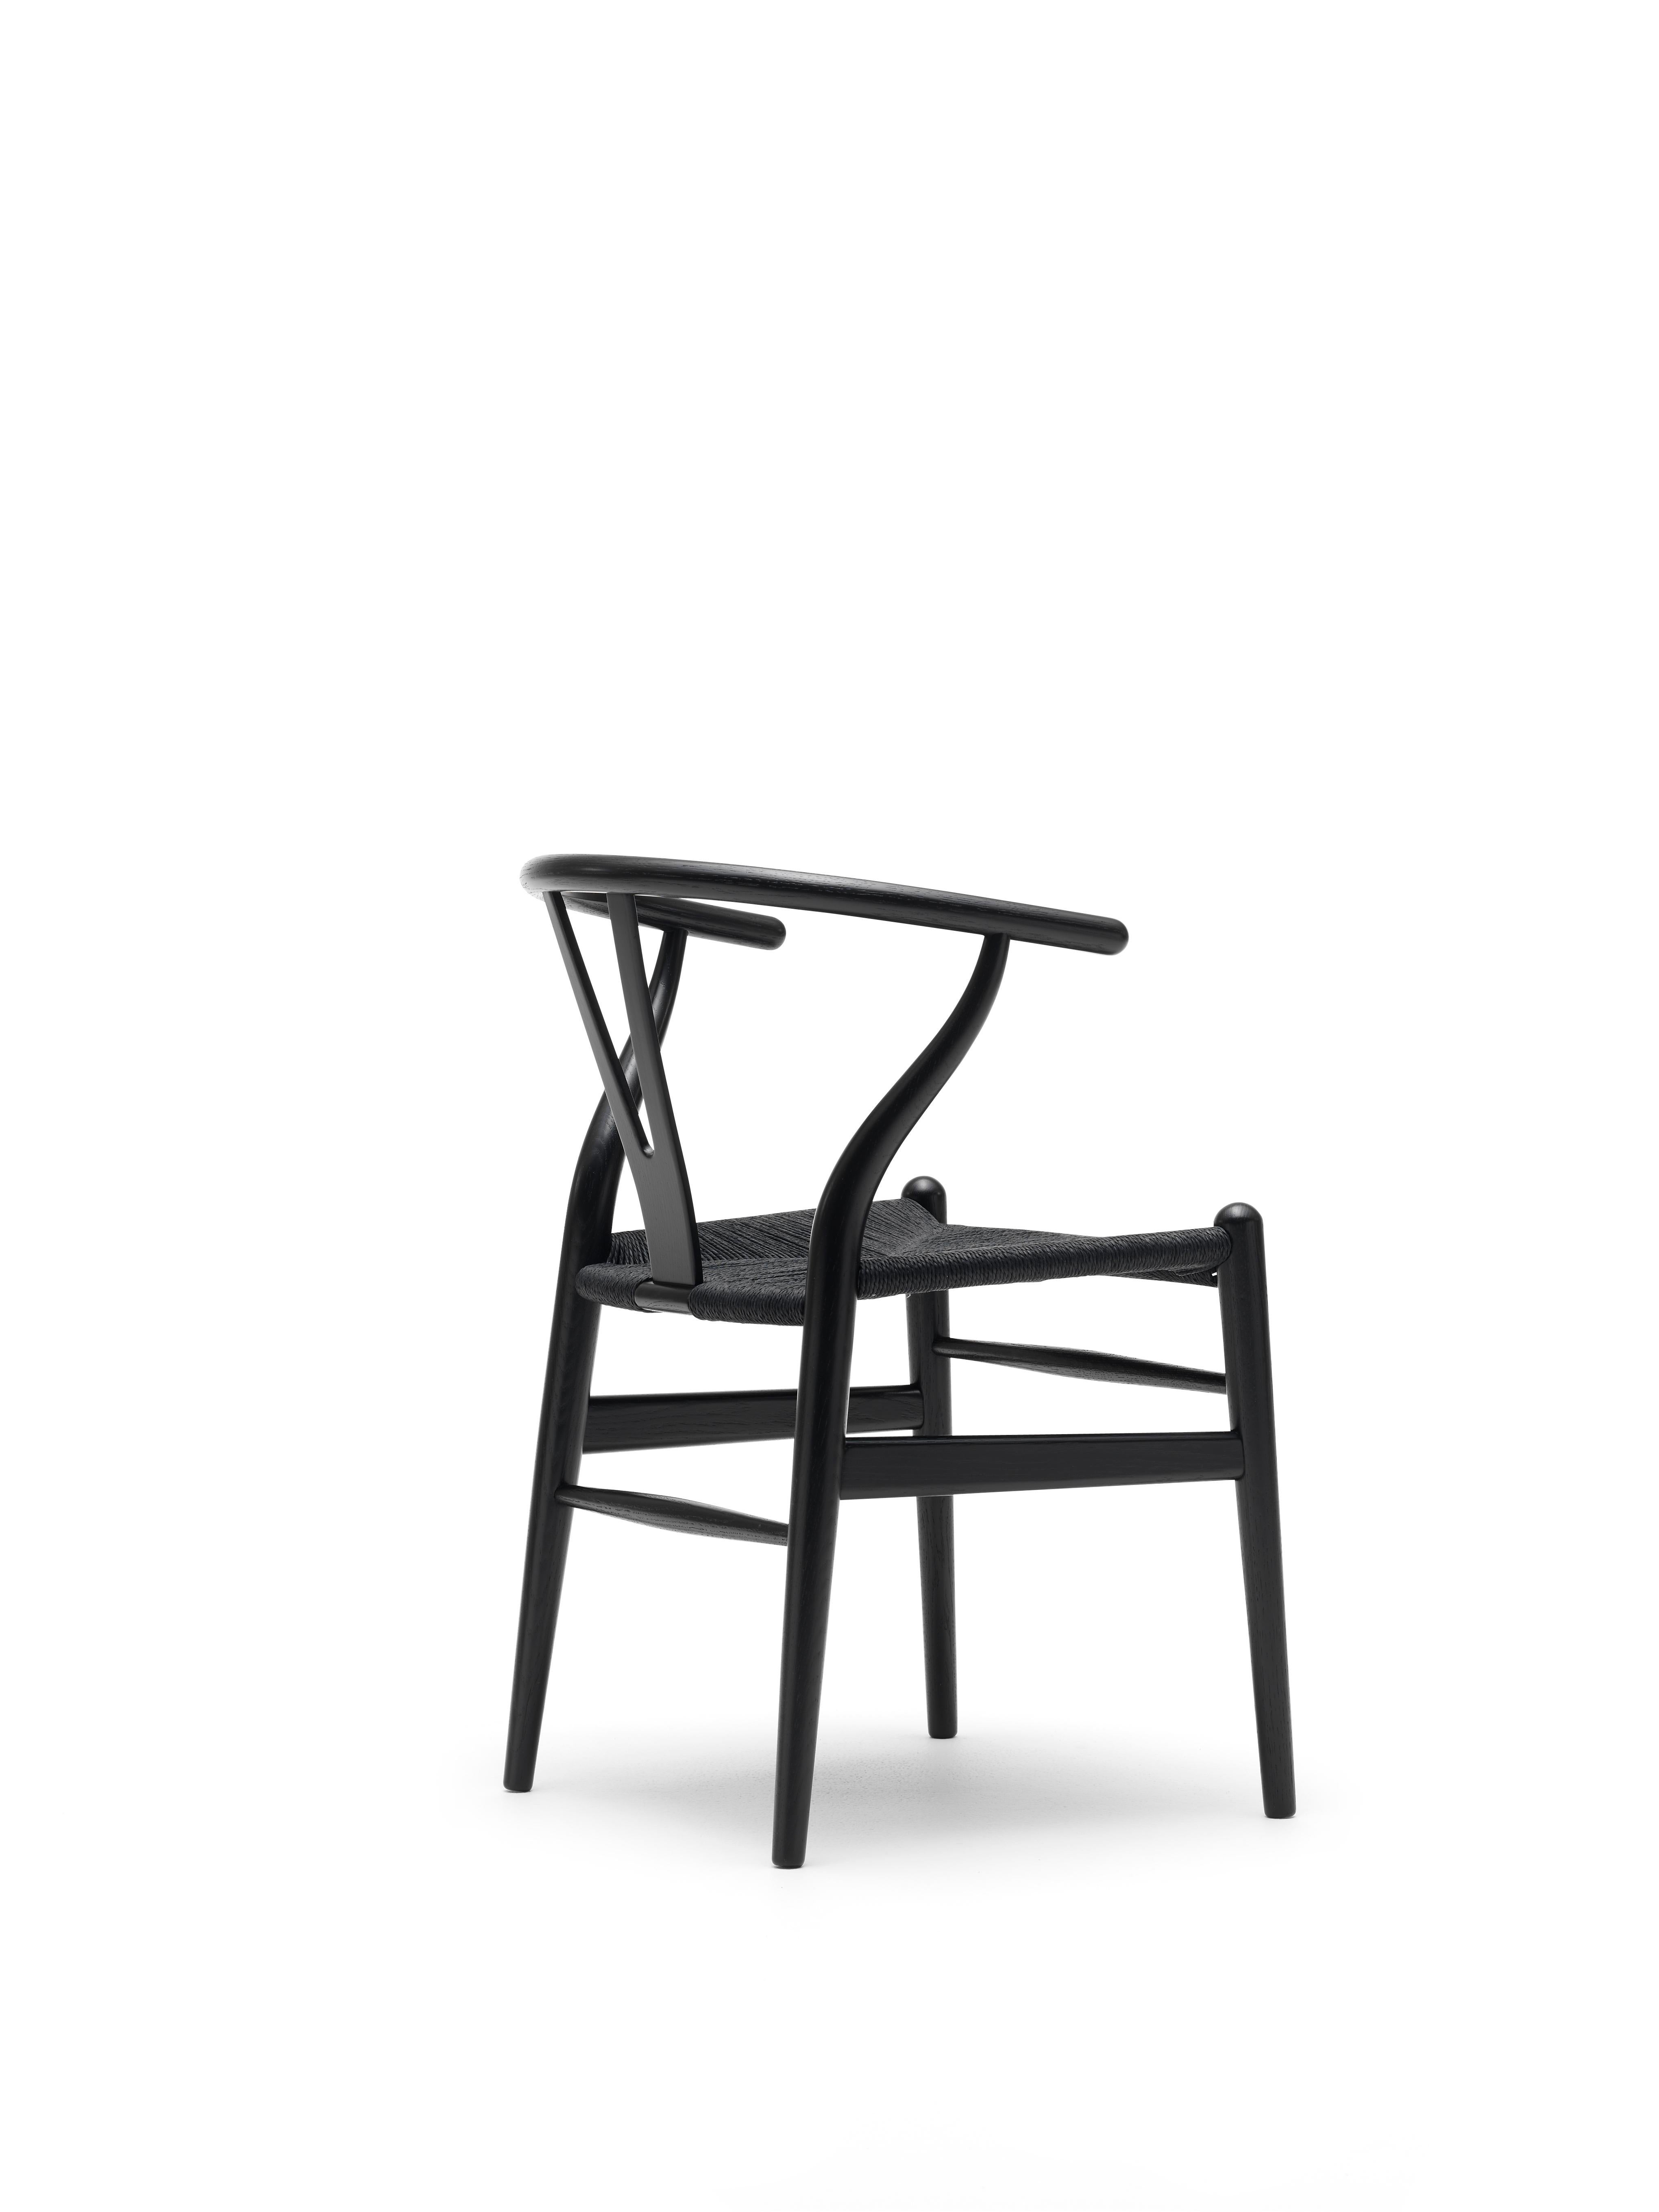 Black (Oak Painted blacks9000-N) CH24 Wishbone Chair in Wood Finishes with Black Papercord Seat by Hans J. Wegner 2